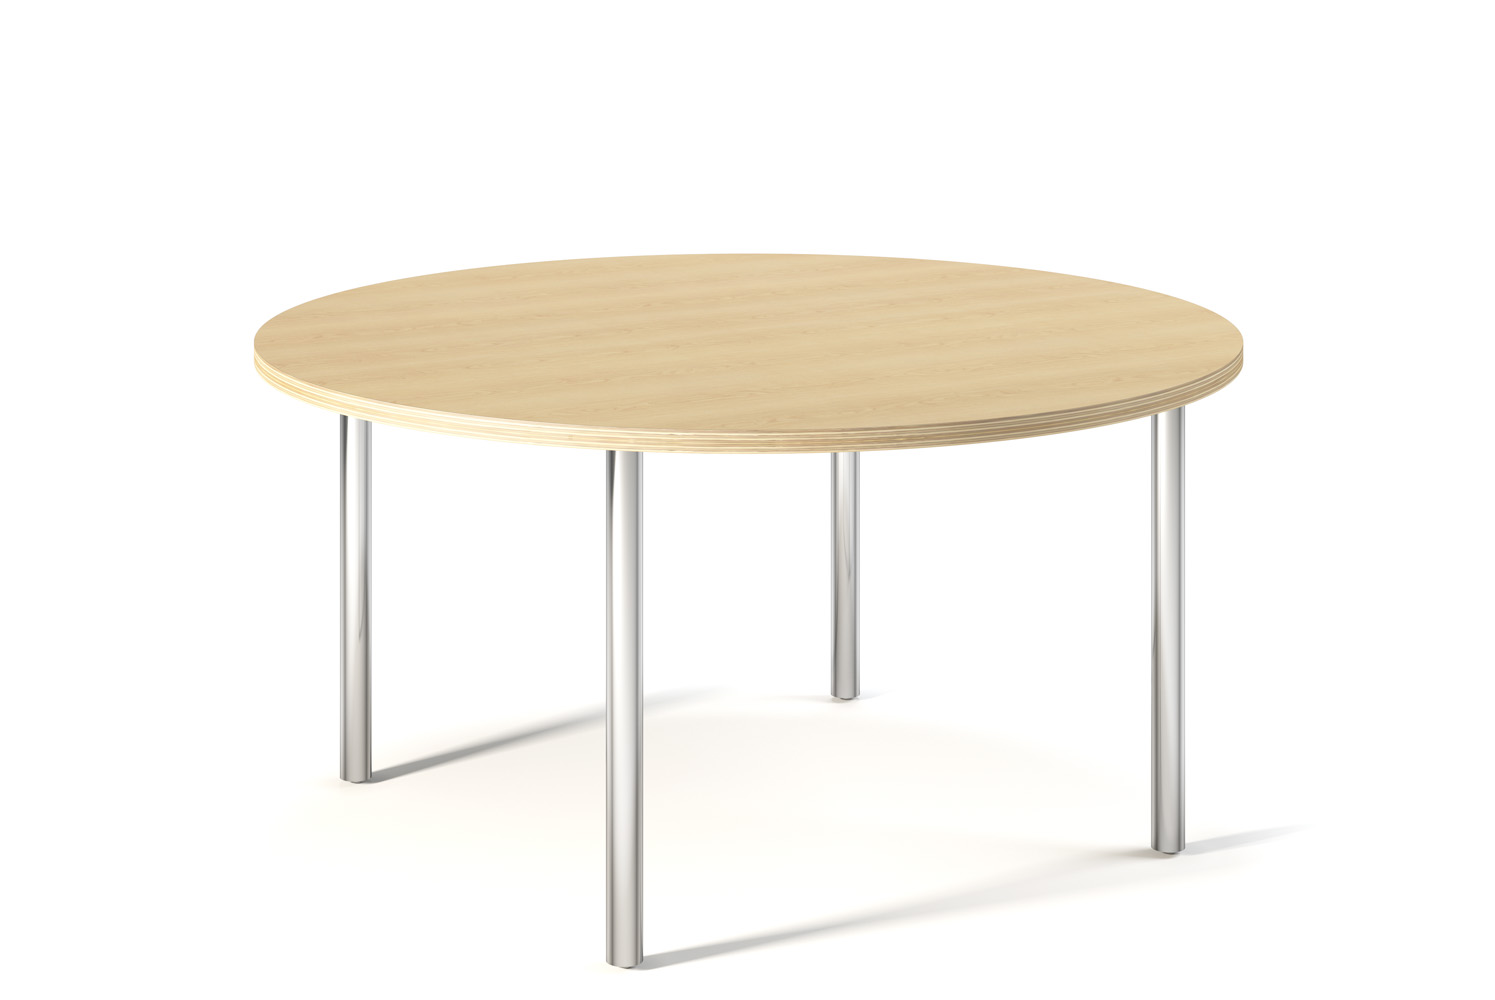 Post 60 Diameter Cafe Table